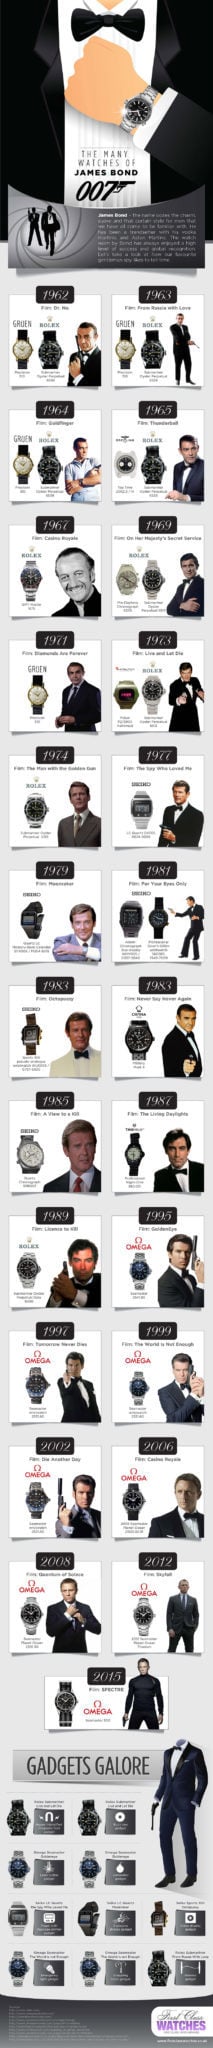 The Many Watches of James Bond – Spectre Infographic